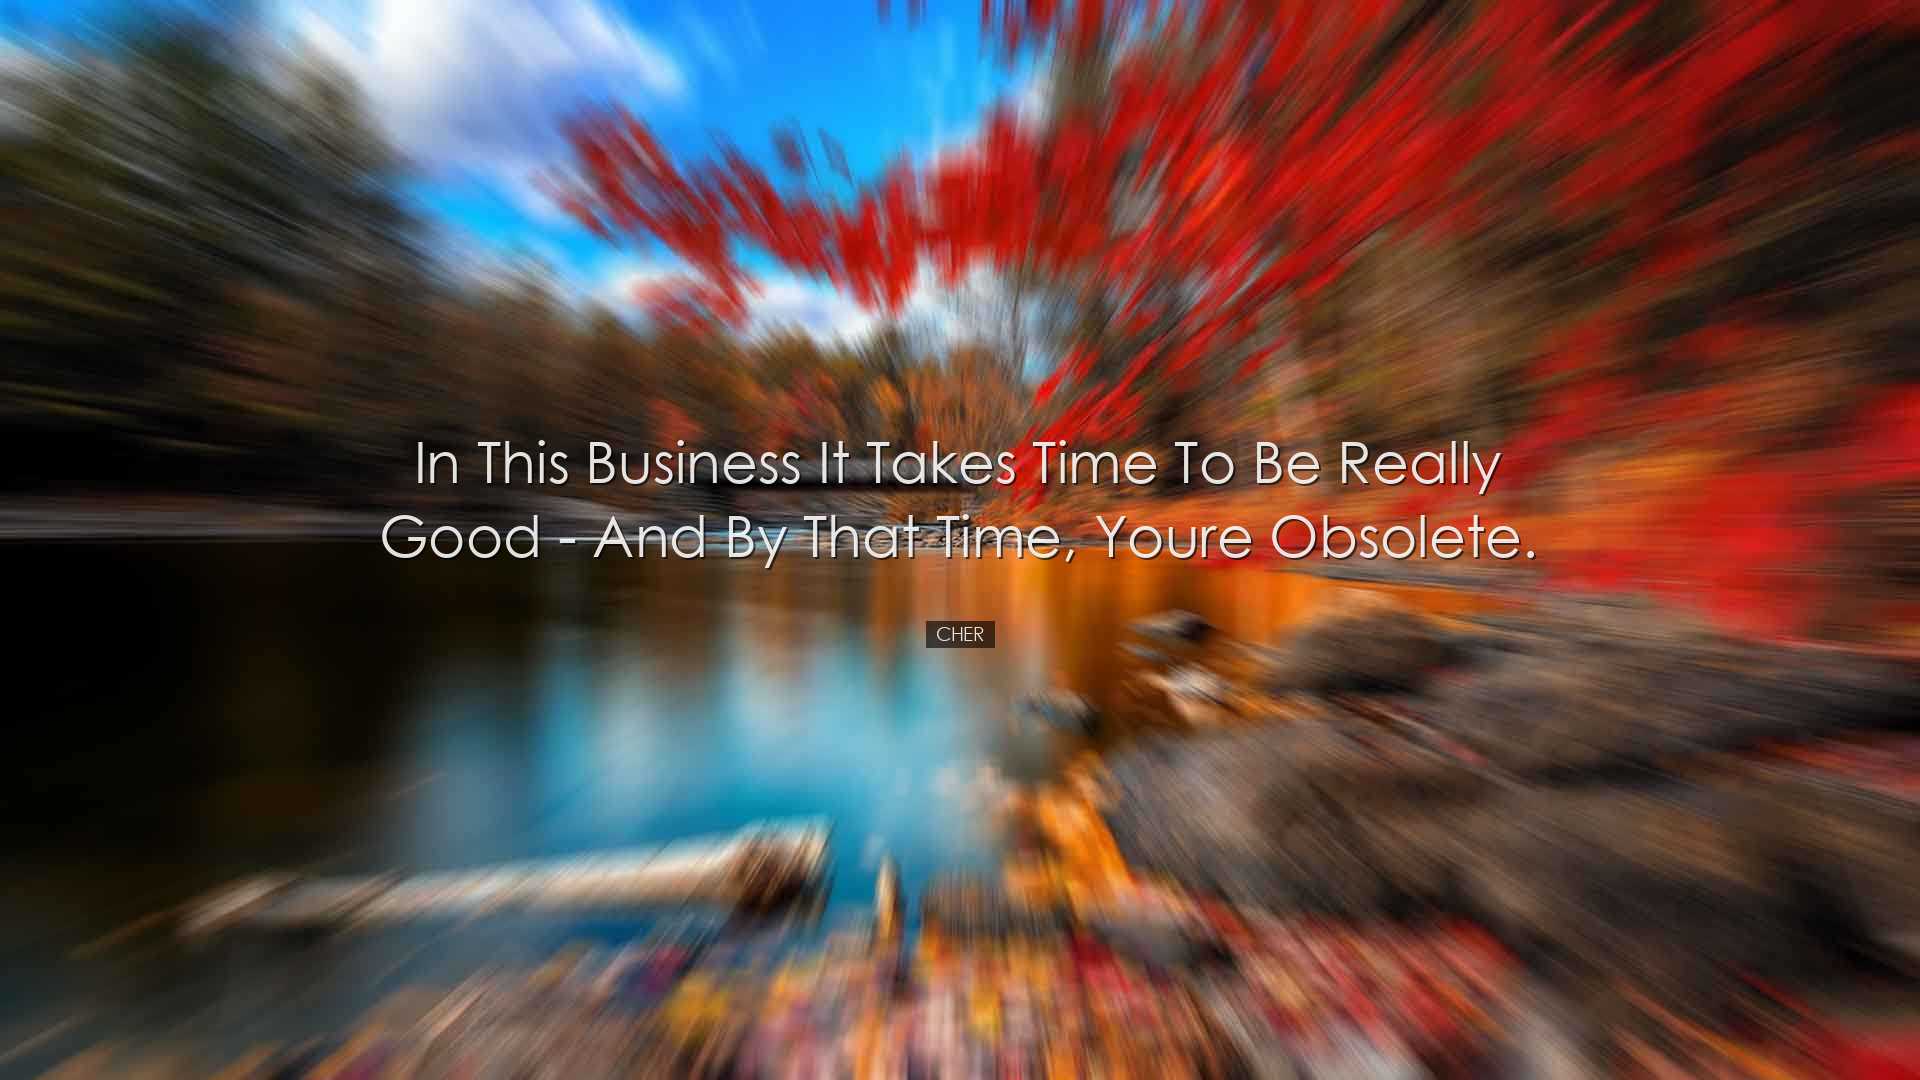 In this business it takes time to be really good - and by that tim